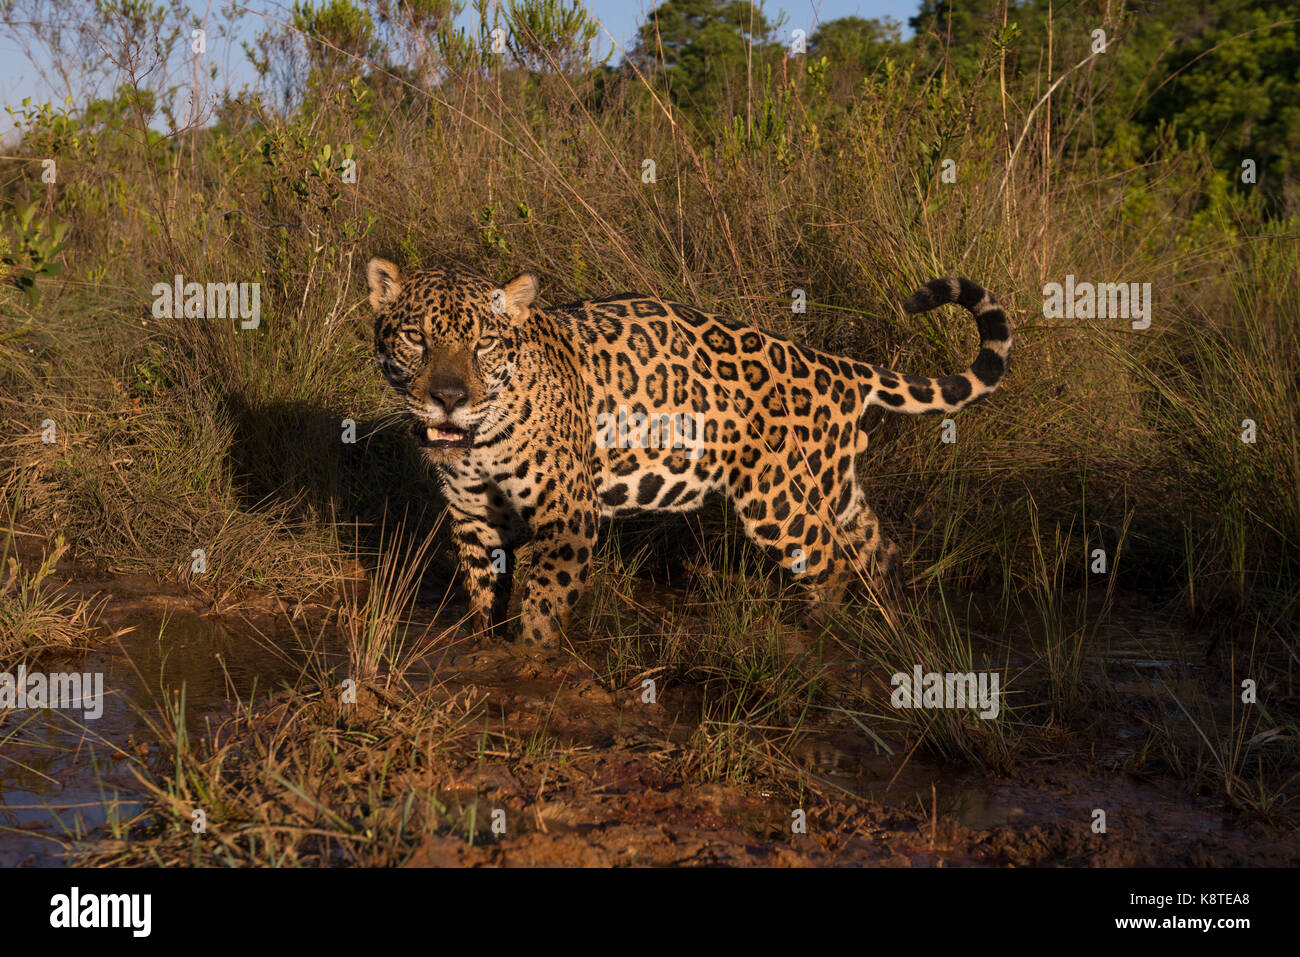 Jaguar in a small creek among native grass from the Cerrado of Central Brazil Stock Photo